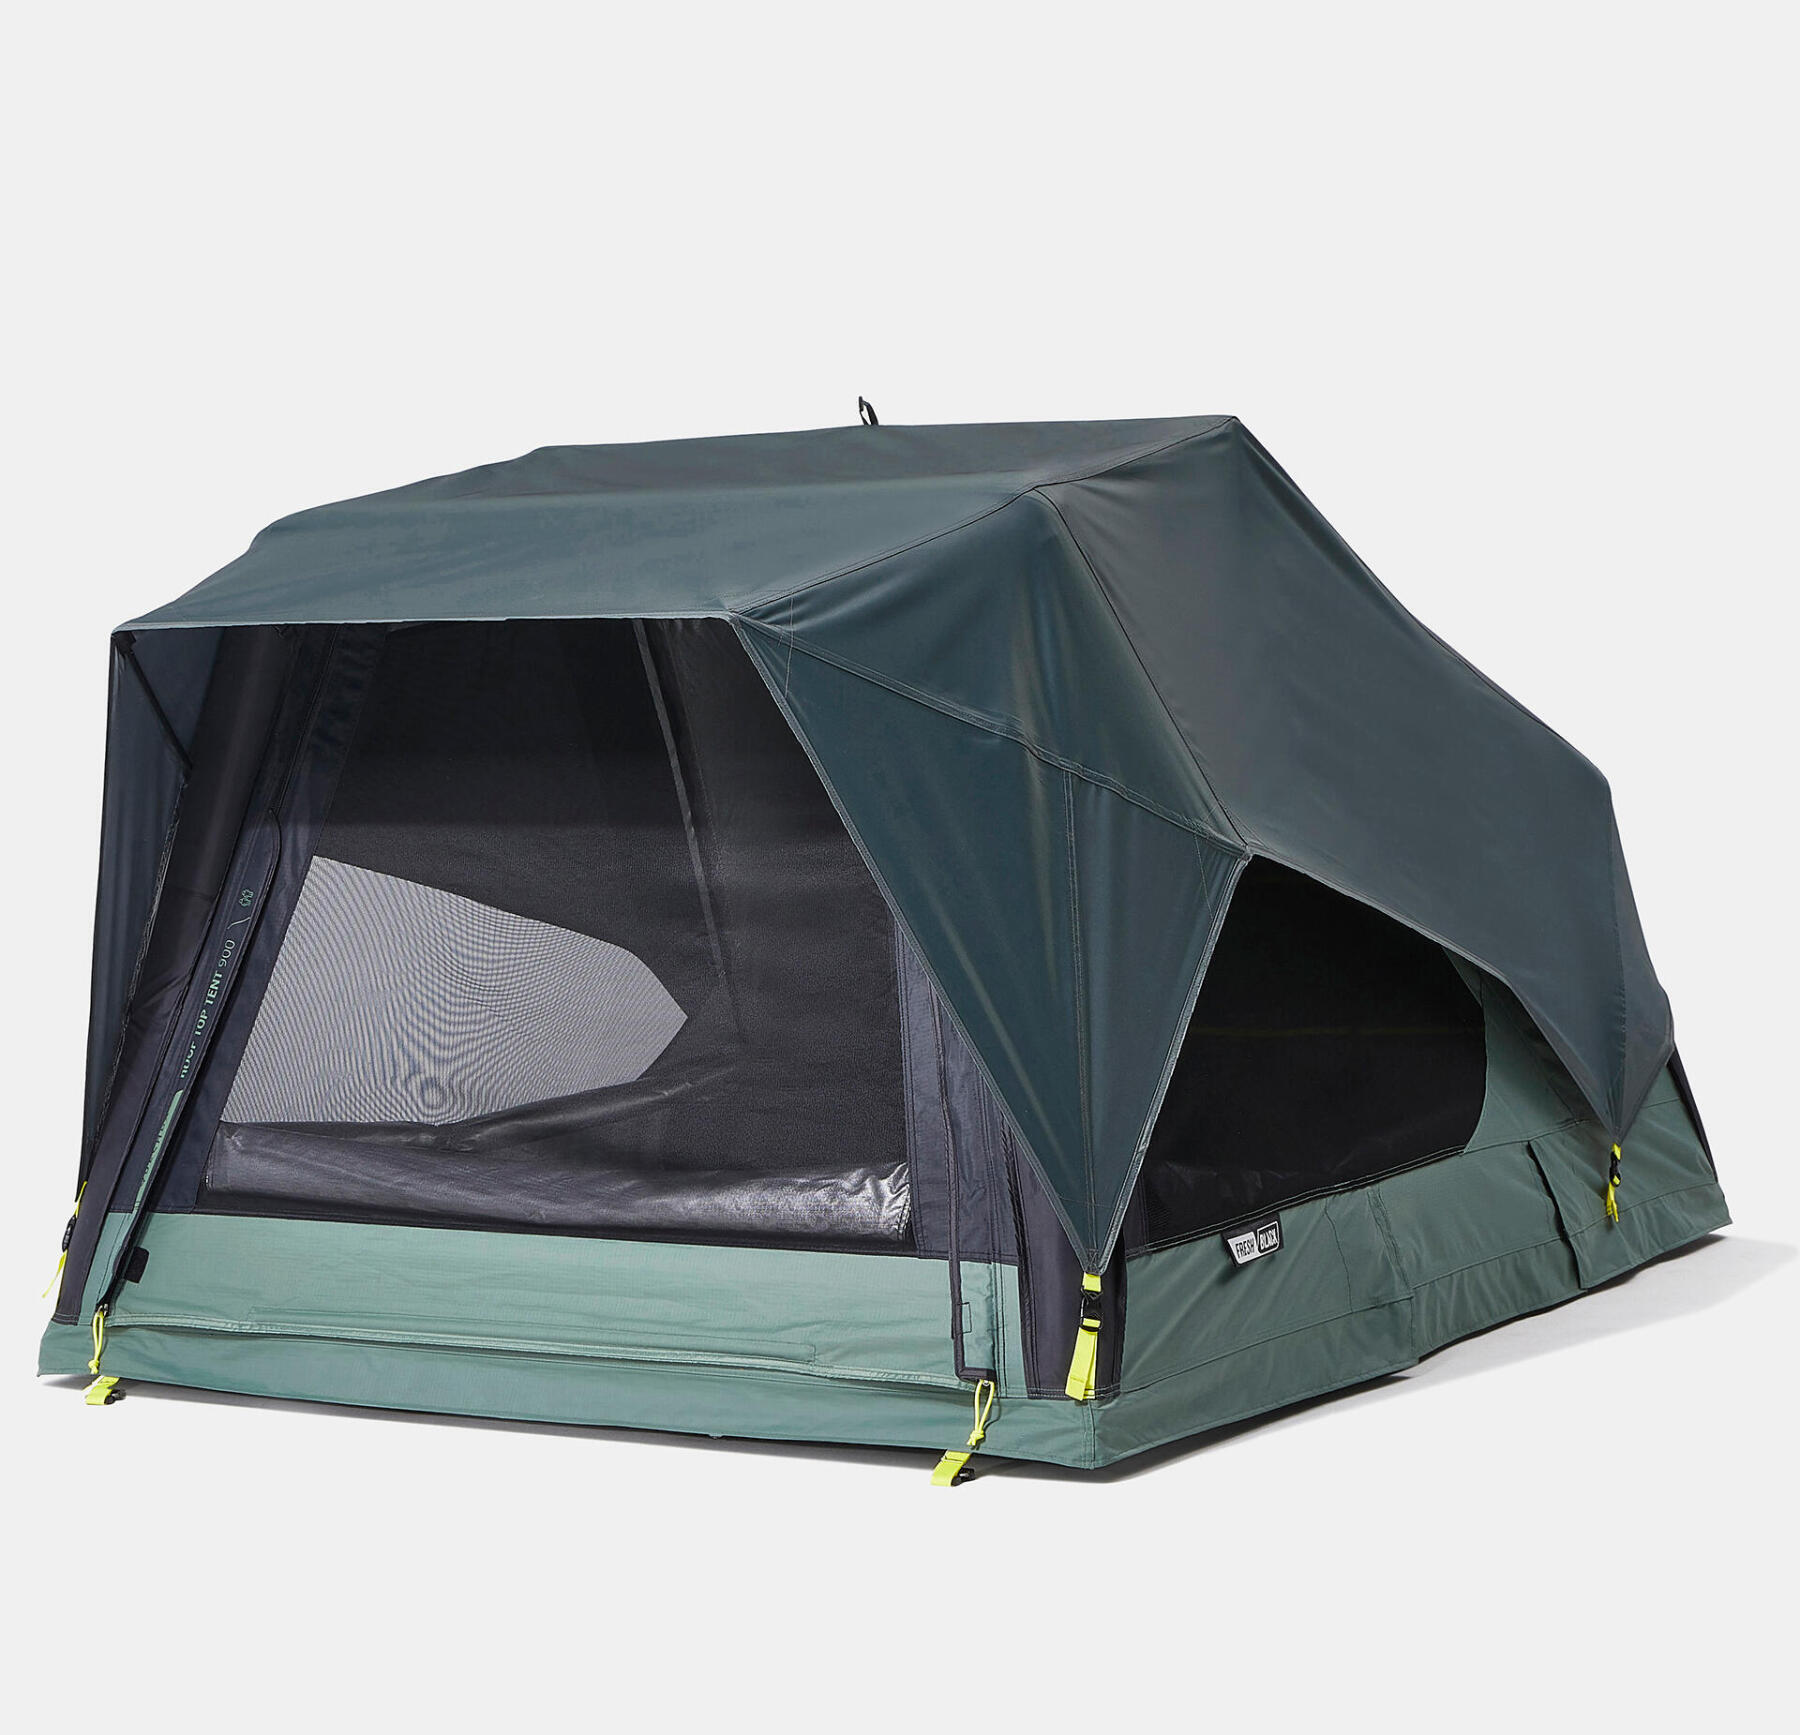 MH900 roof top tent: tips, care and repair 